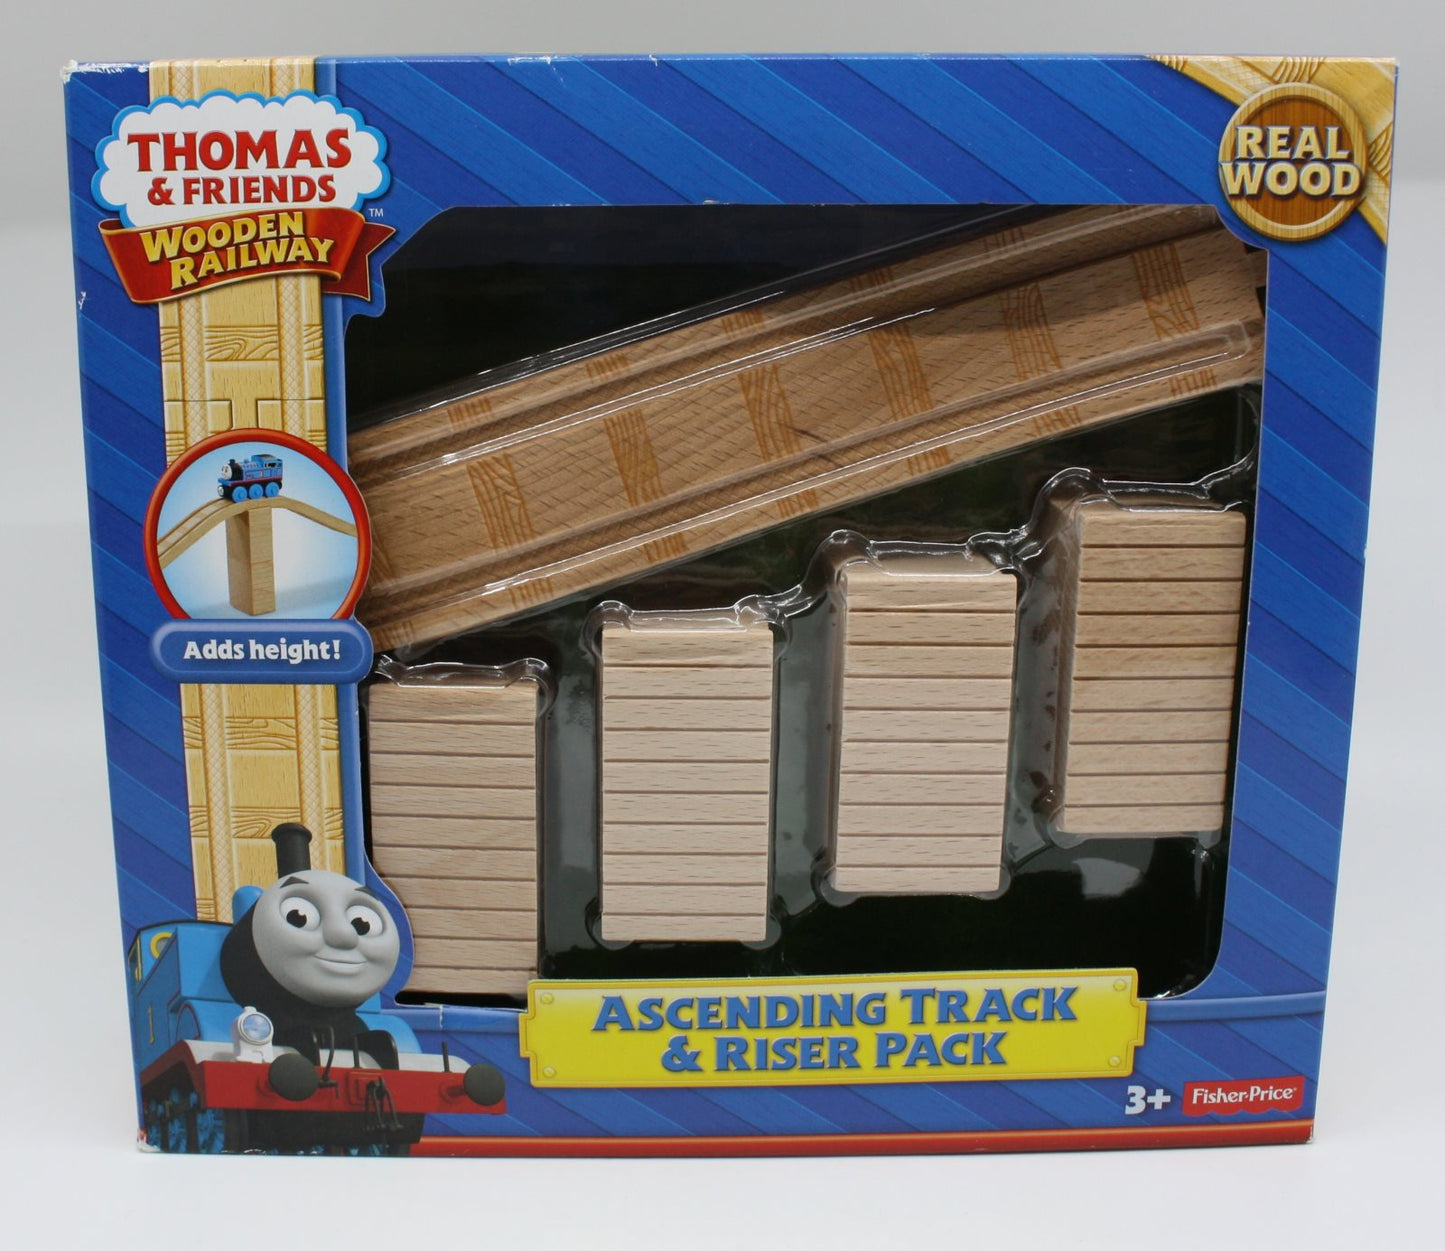 Fisher Price Y4500 Thomas & Friends™ Wooden Railway Ascending Track & Riser Pack